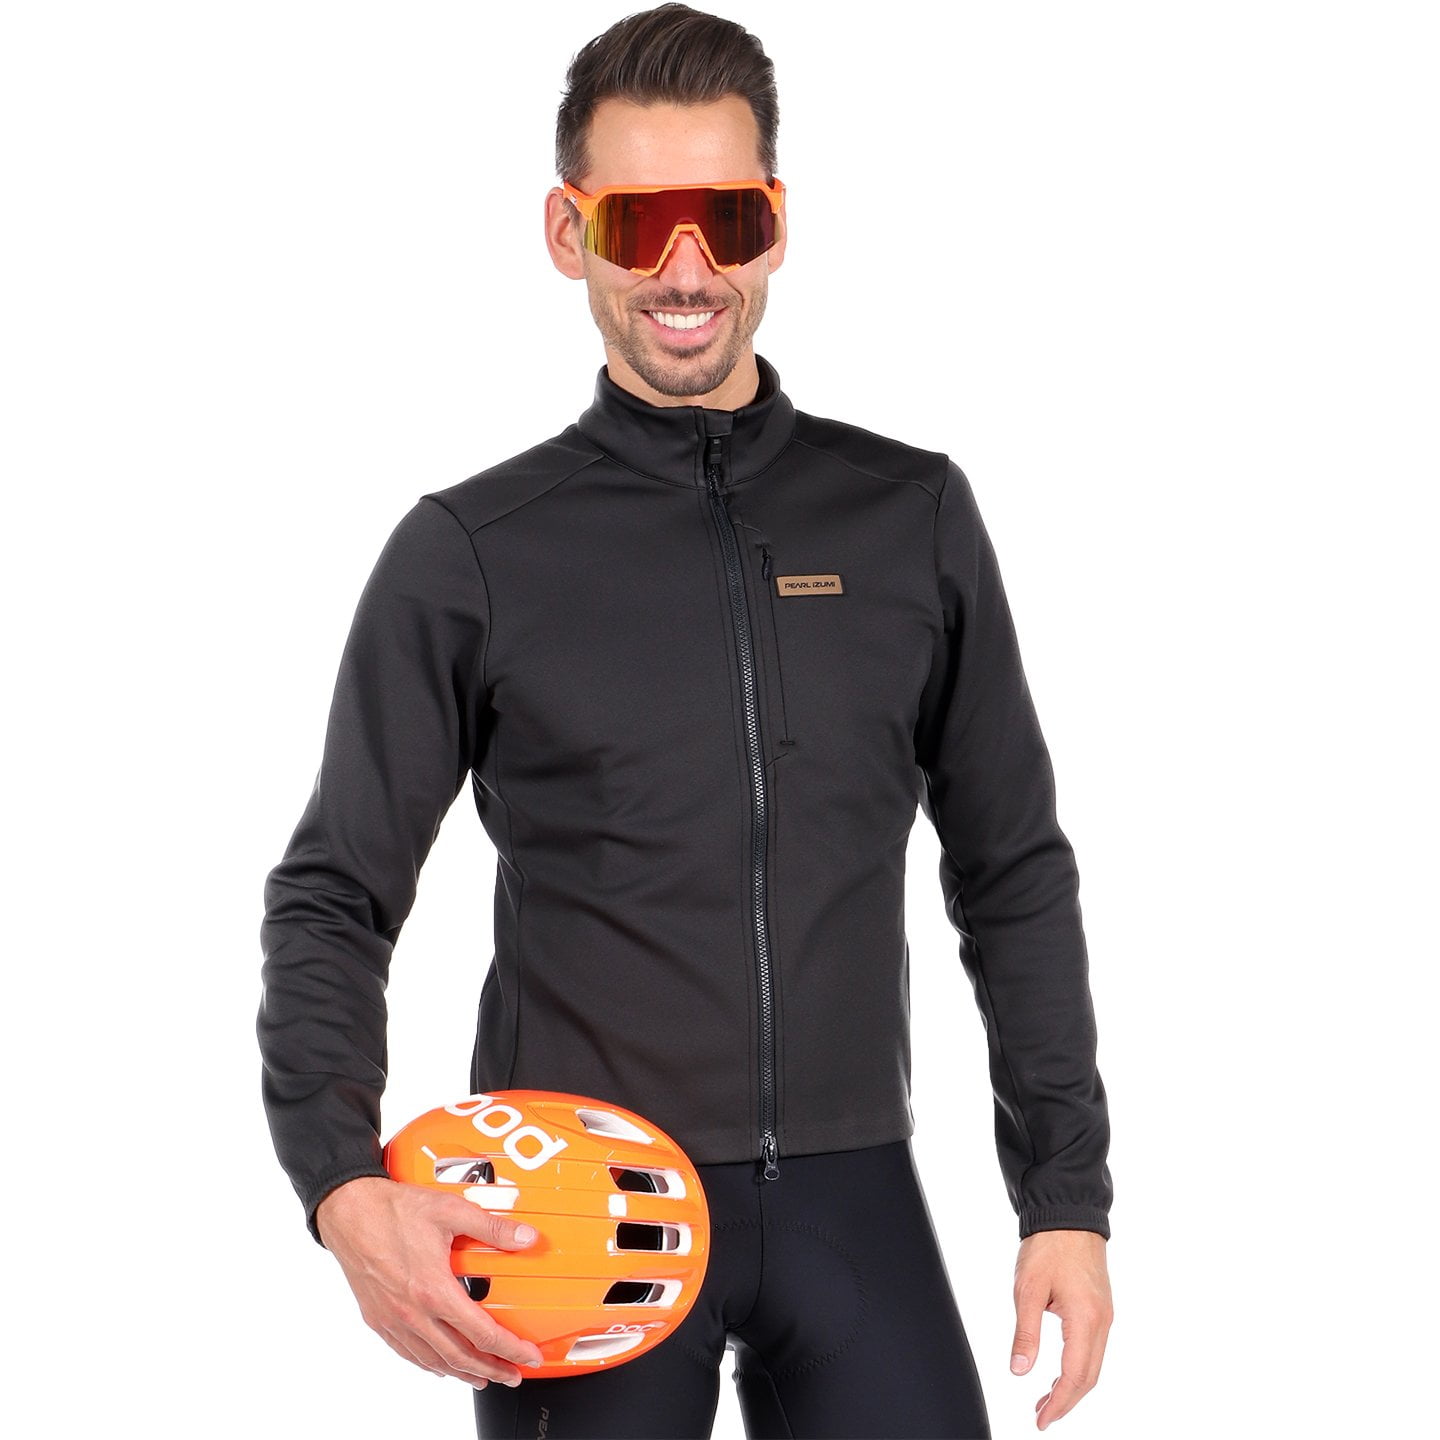 PEARL IZUMI AmFIB Lite Winter Jacket Thermal Jacket, for men, size L, Winter jacket, Cycle clothing